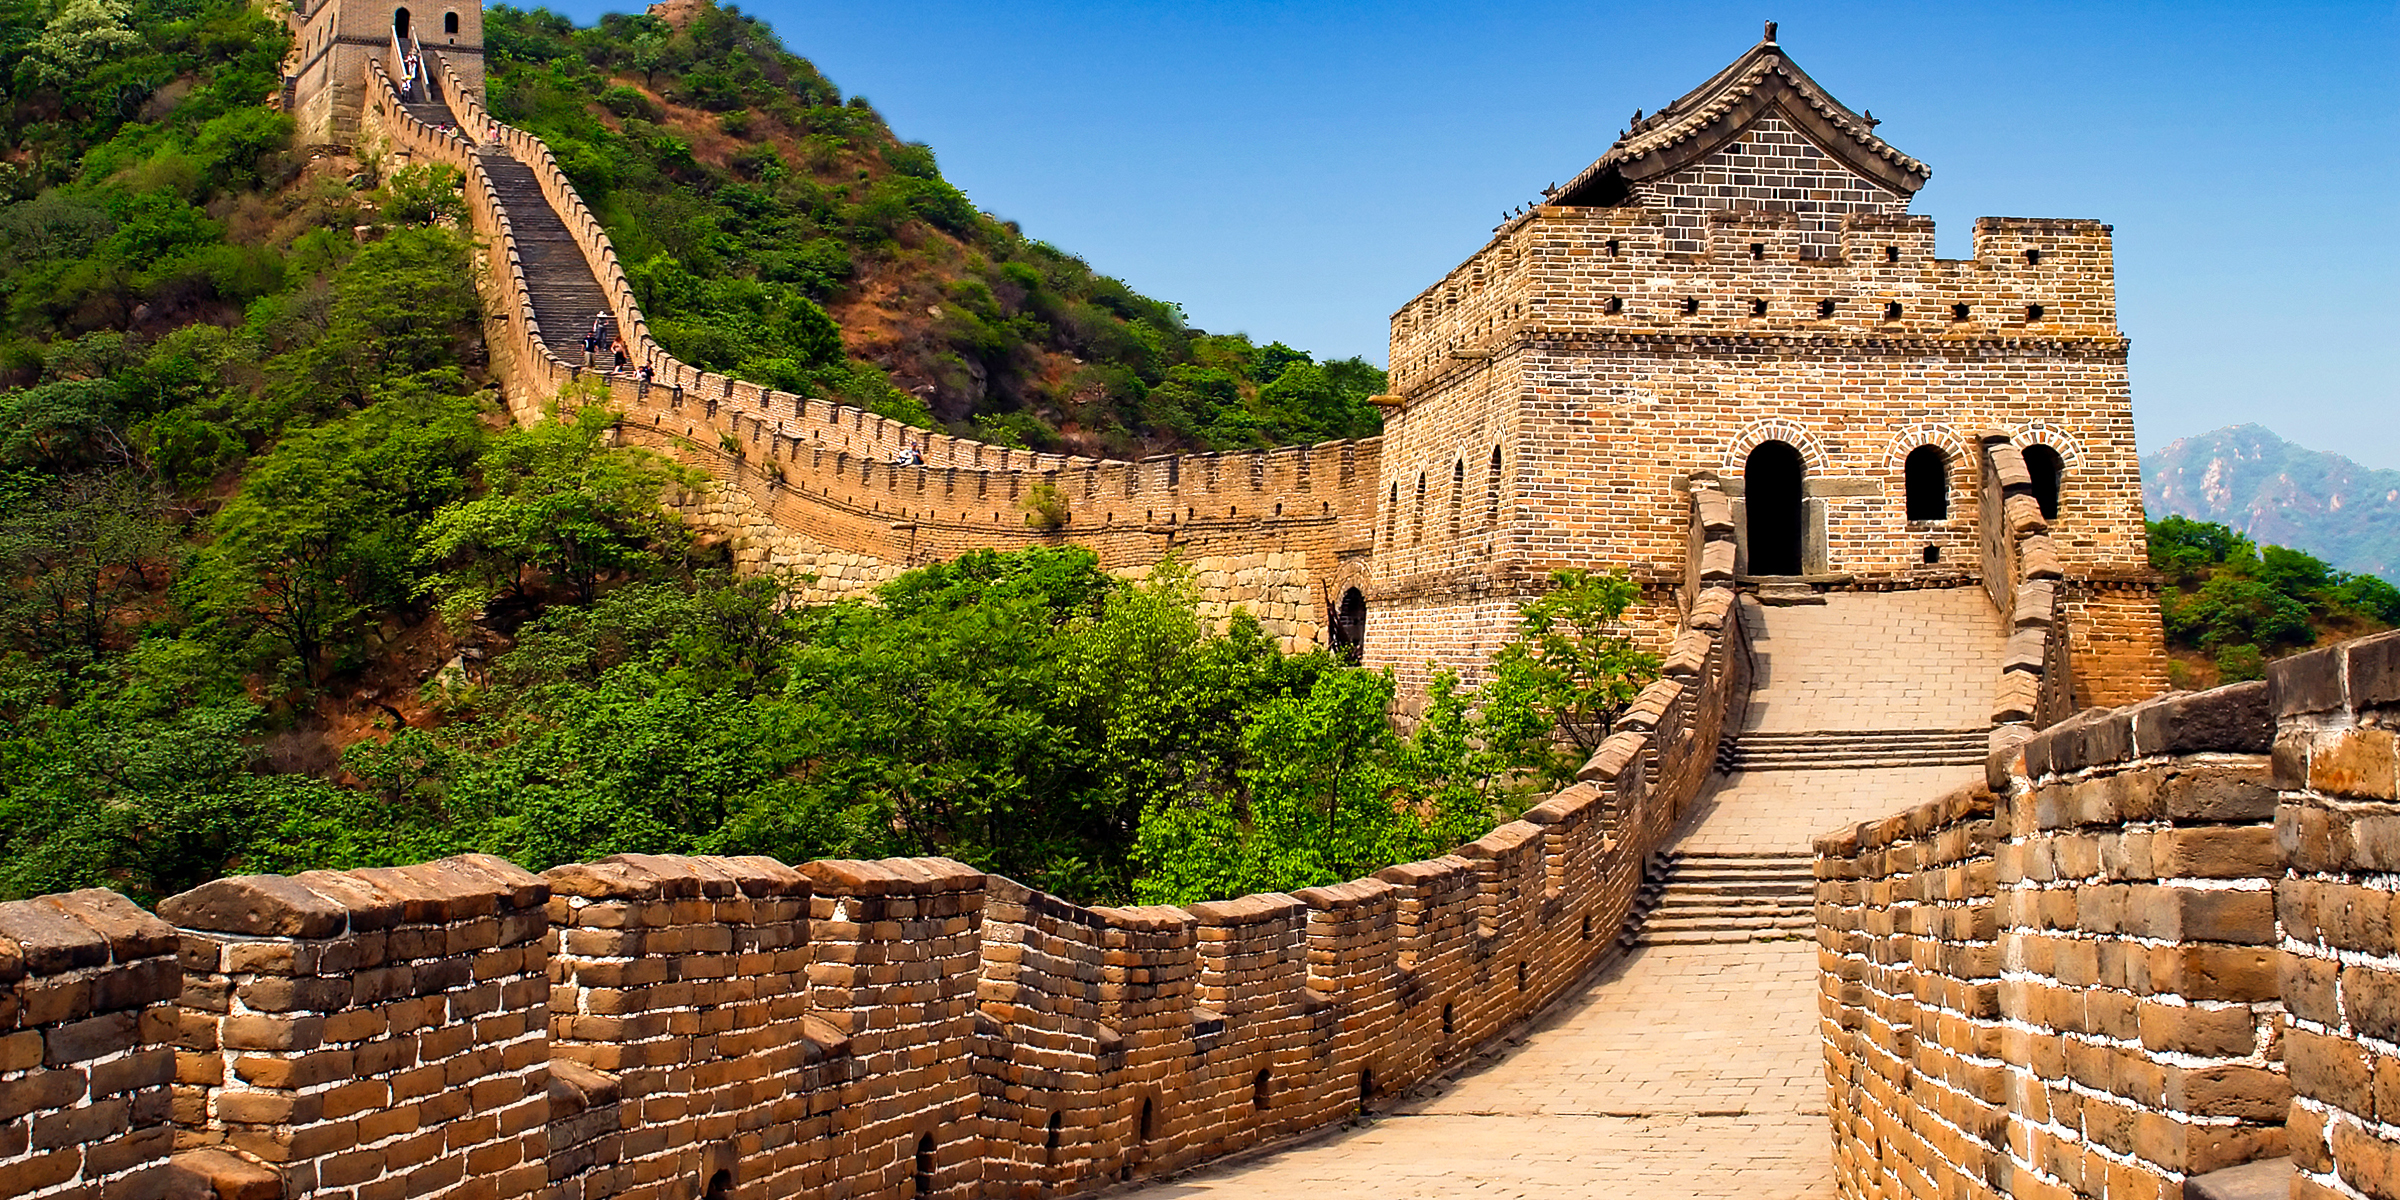 The Great Wall of China | Source: Shutterstock